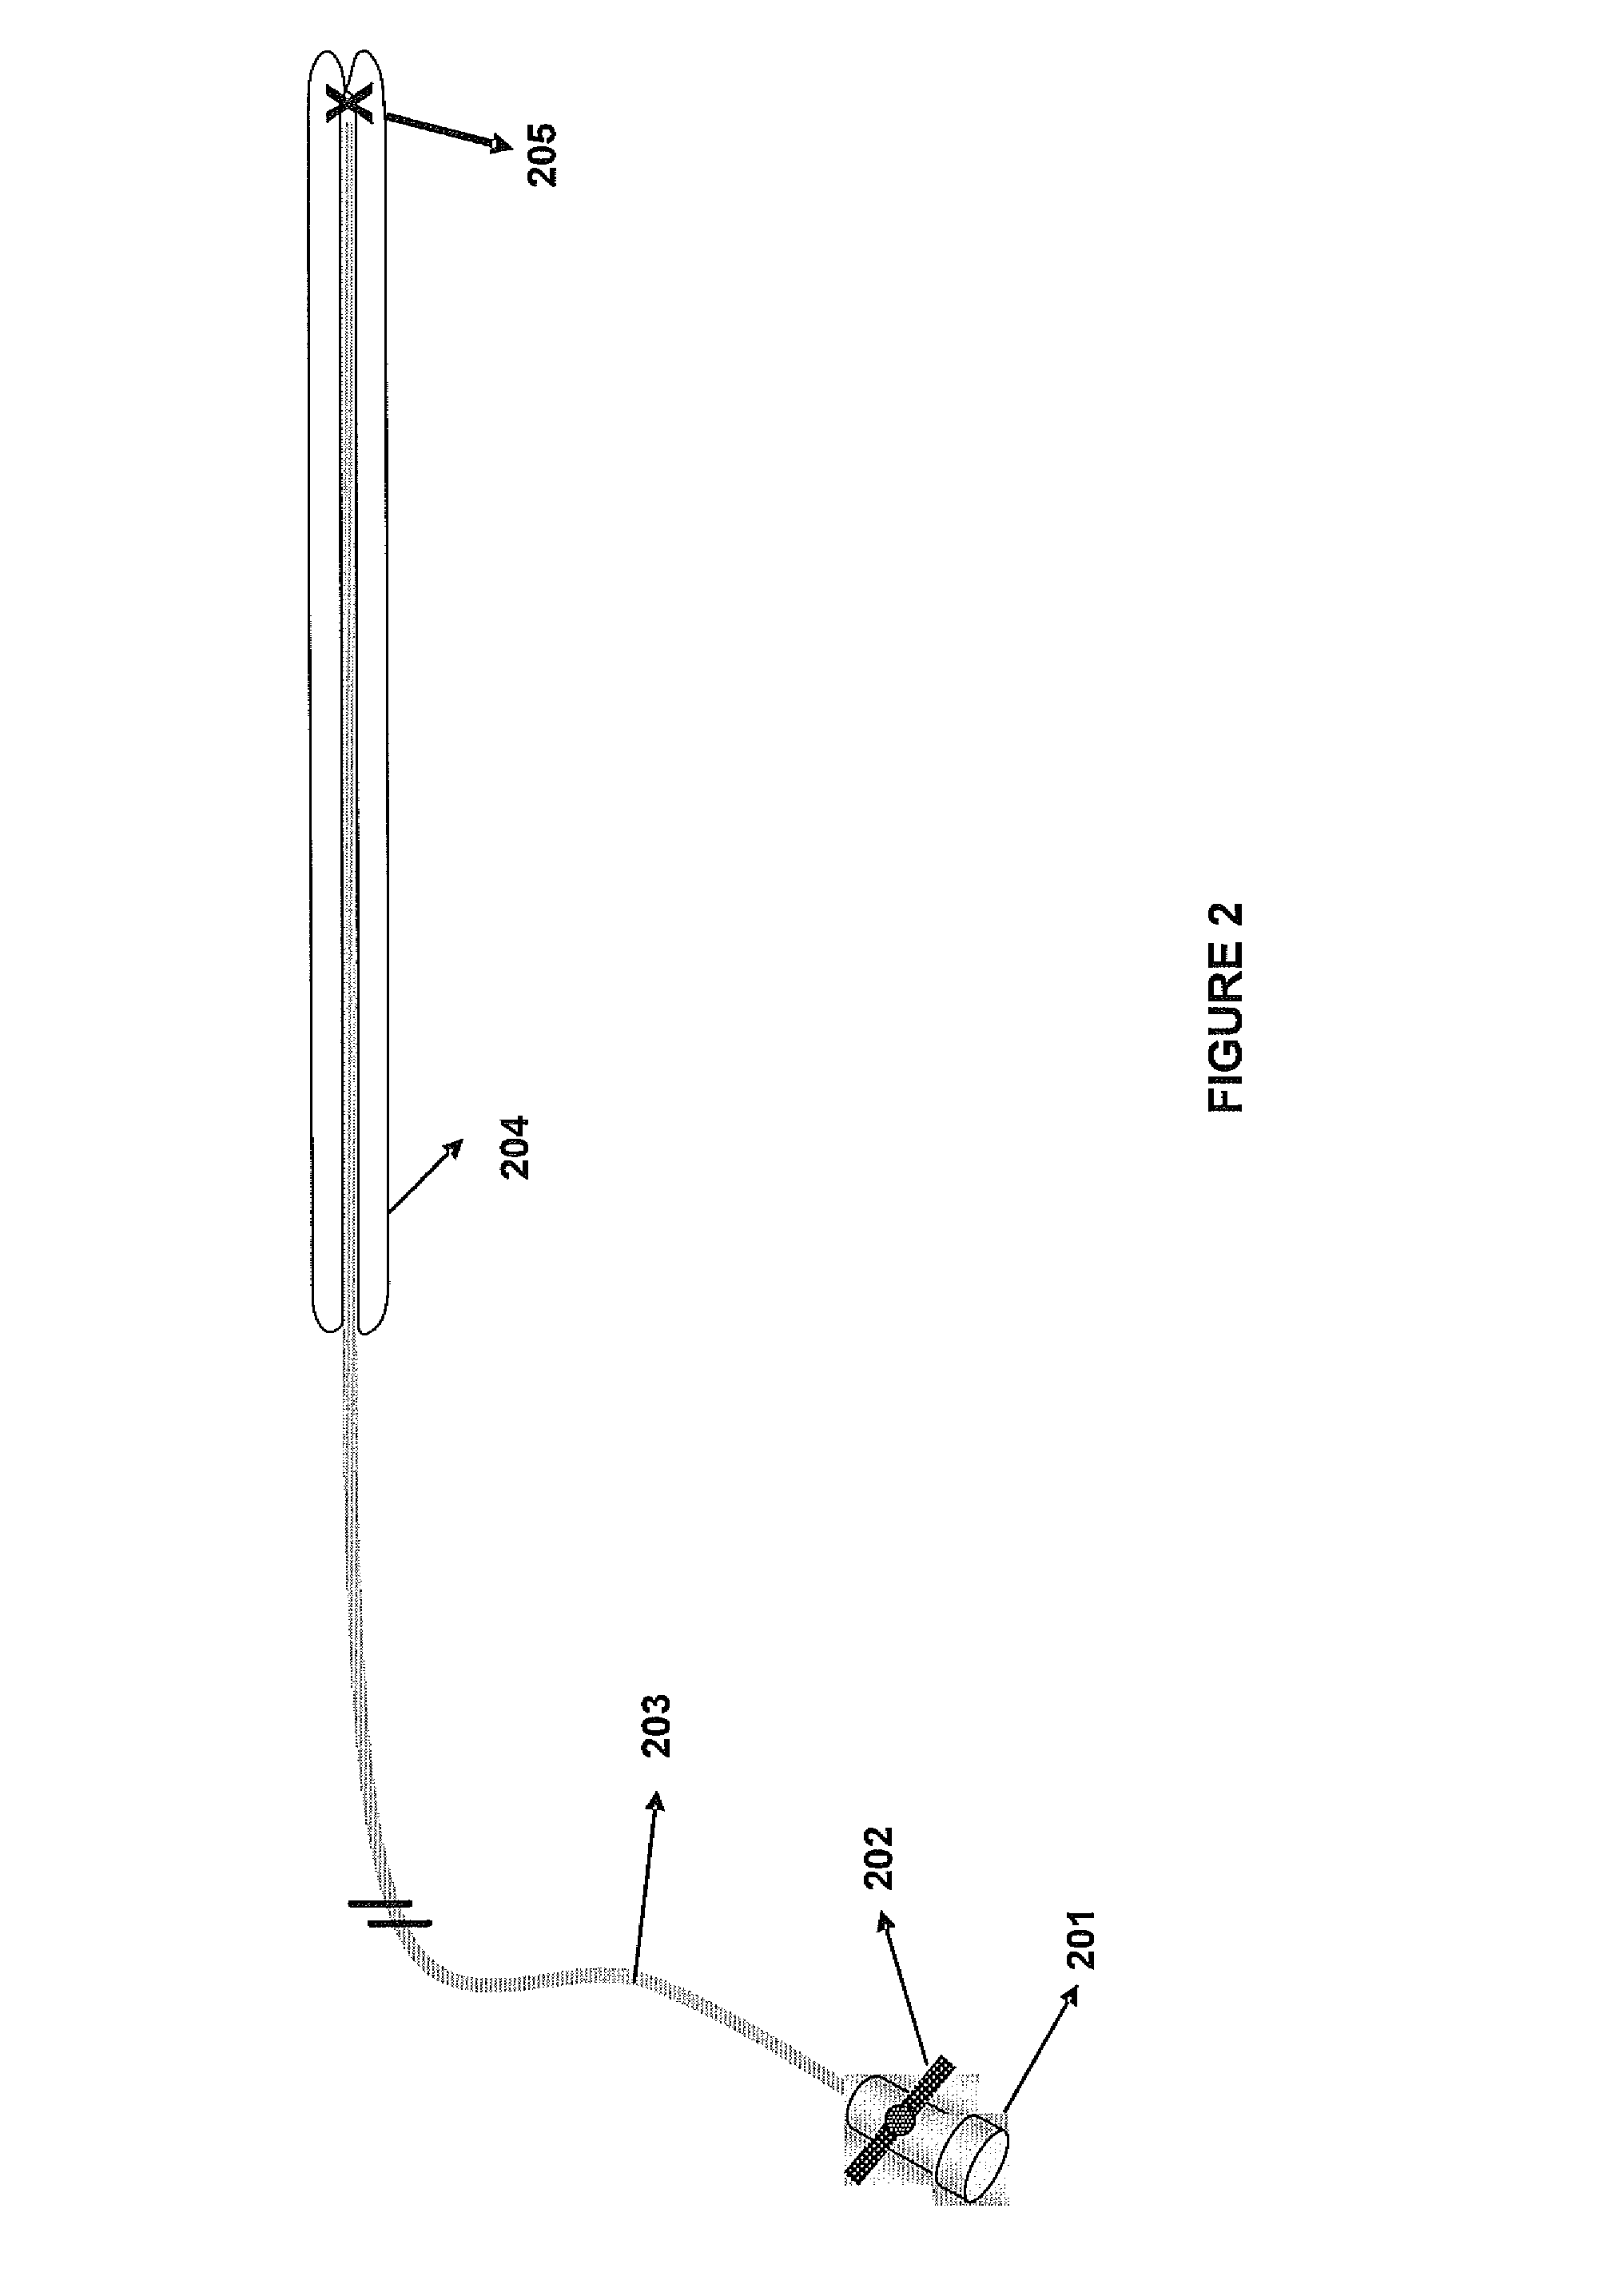 Method and device for extracting objects from the body